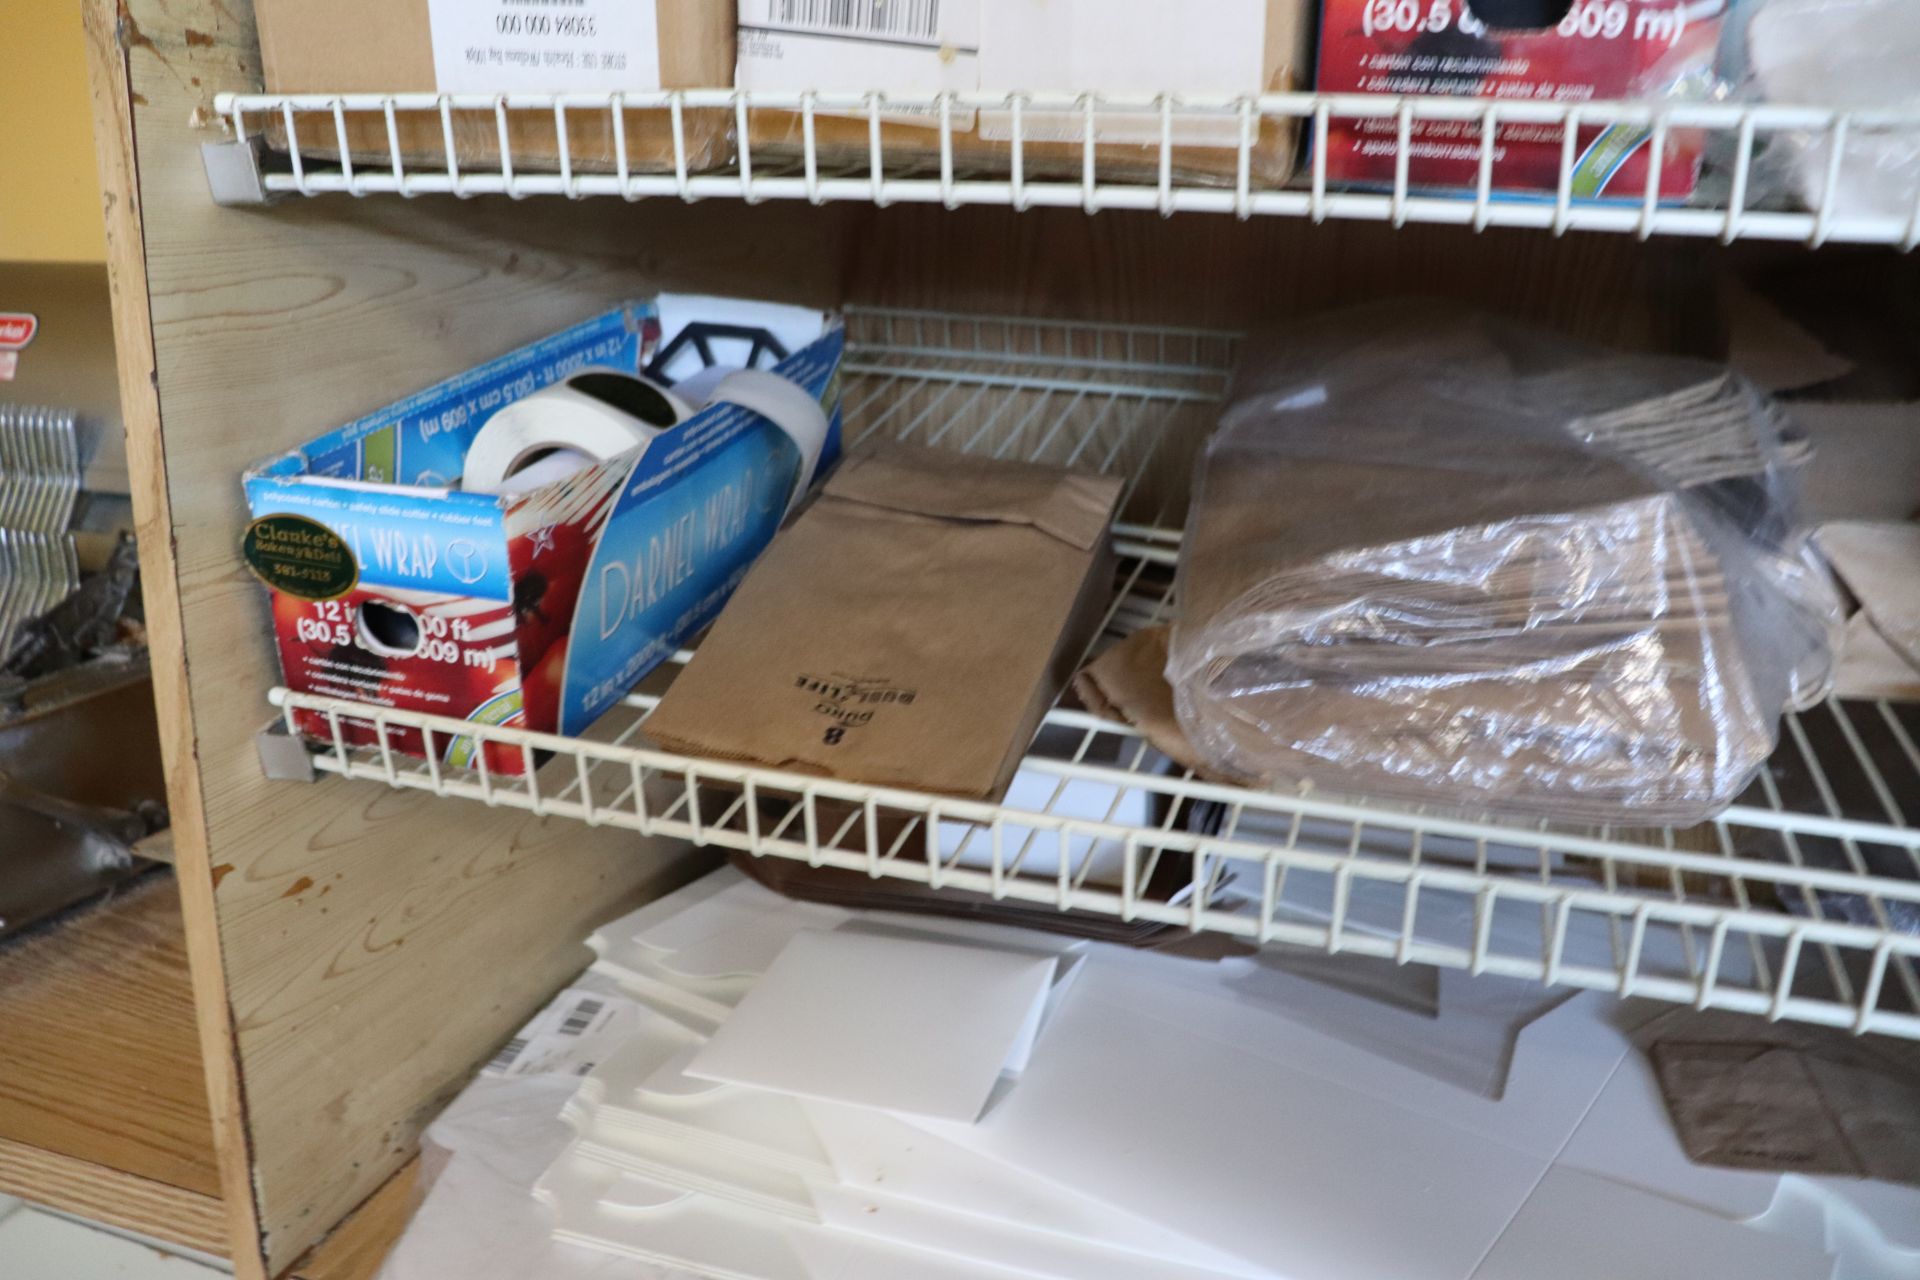 content Of shelves including to go boxes grocery bags and other miscellaneous - Image 6 of 9